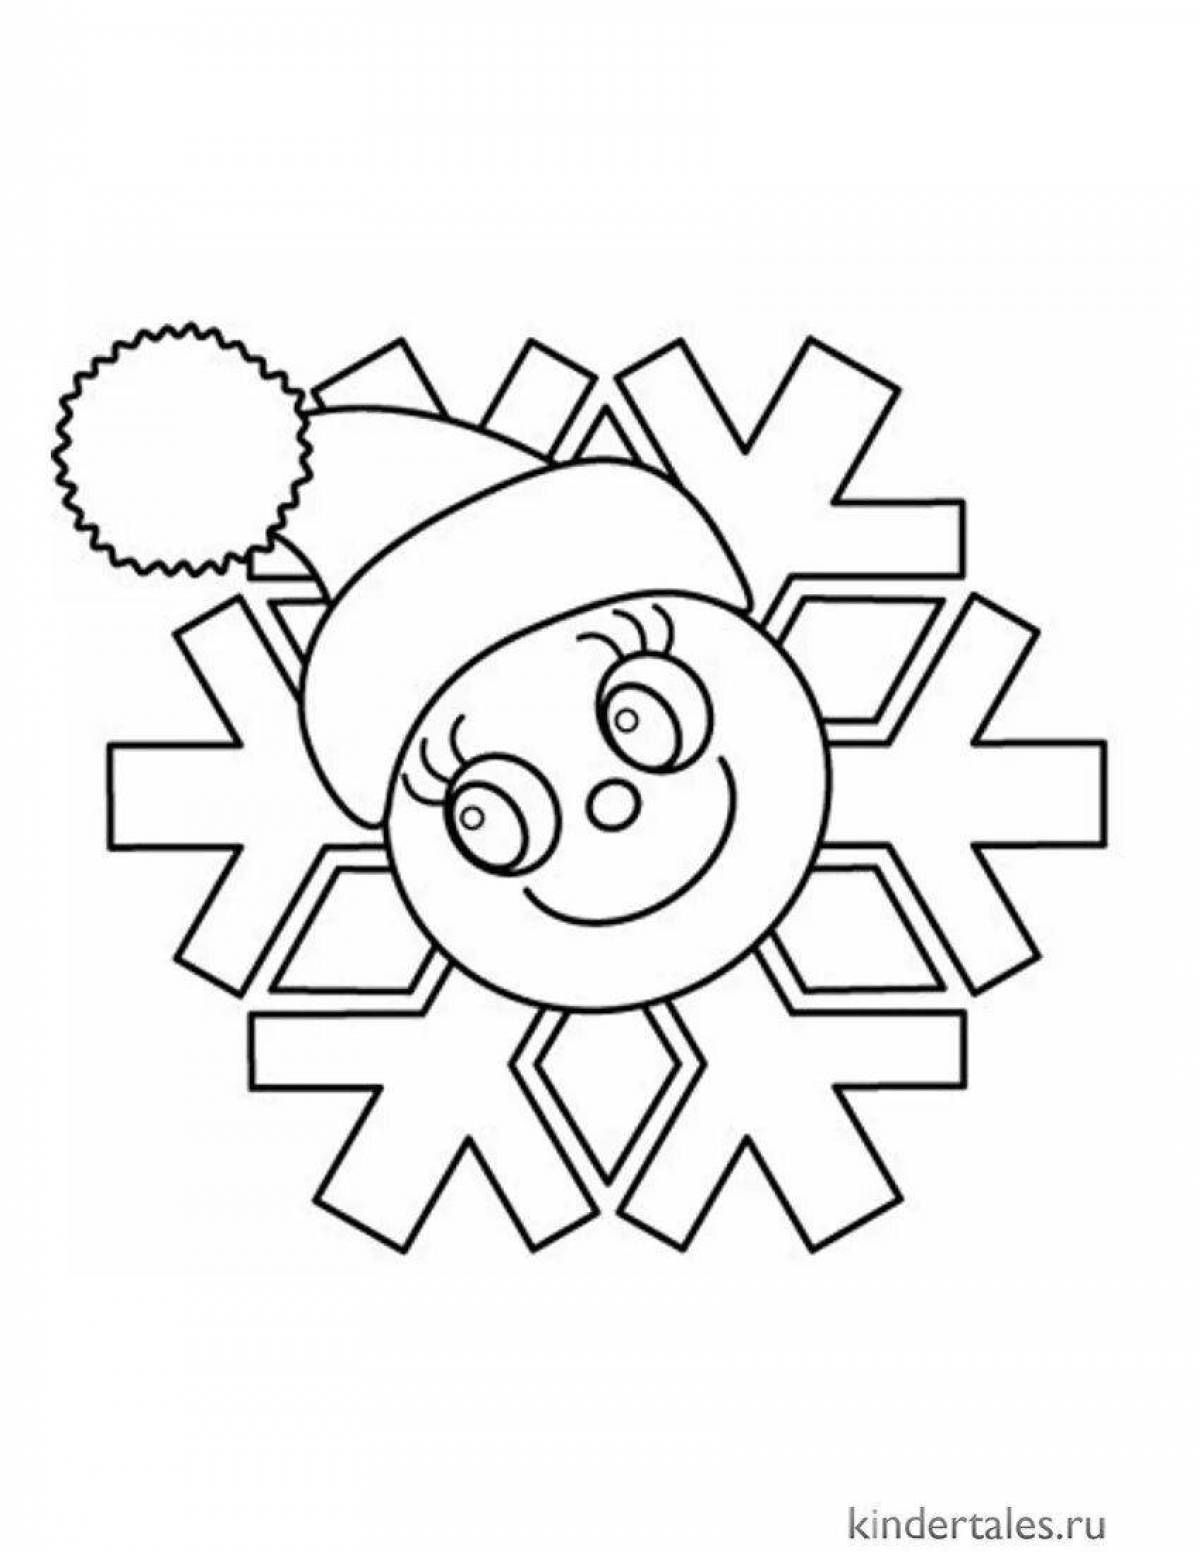 Dazzling snowflake coloring book for kids